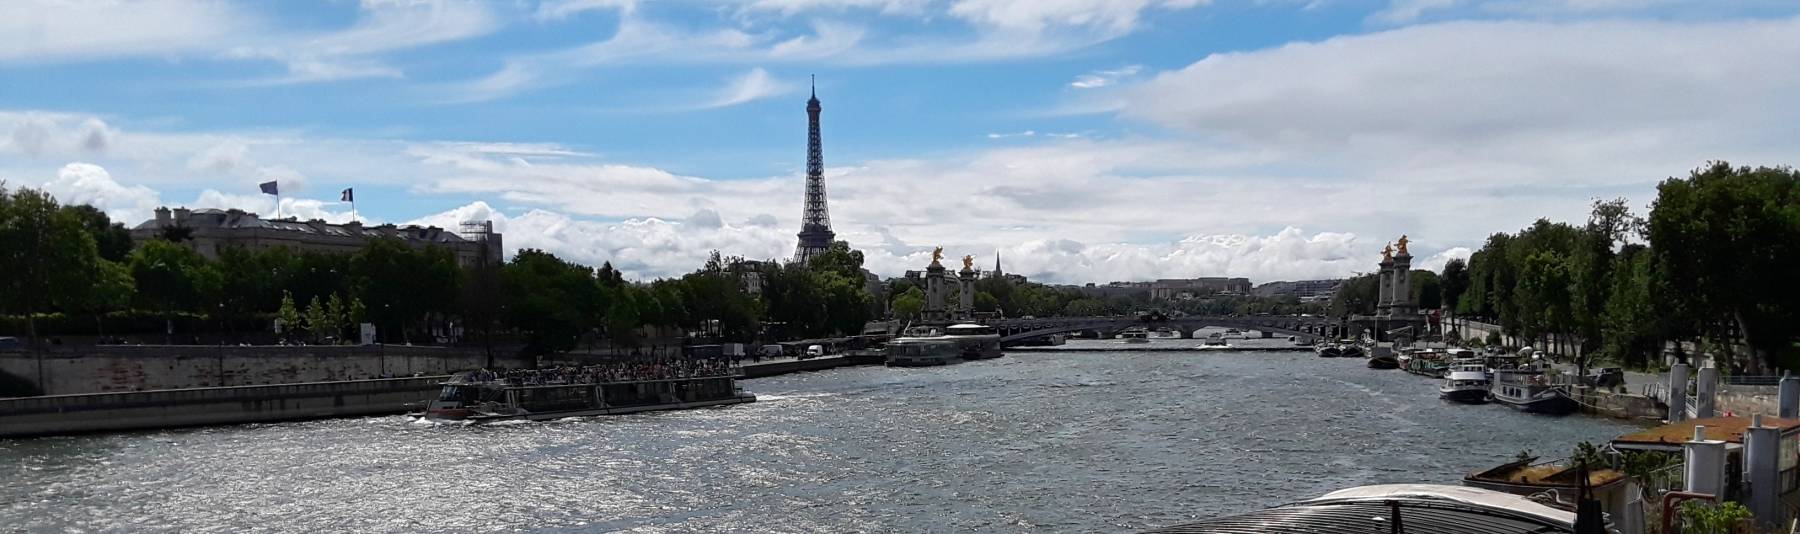 Seine River and the Eiffel Tower.